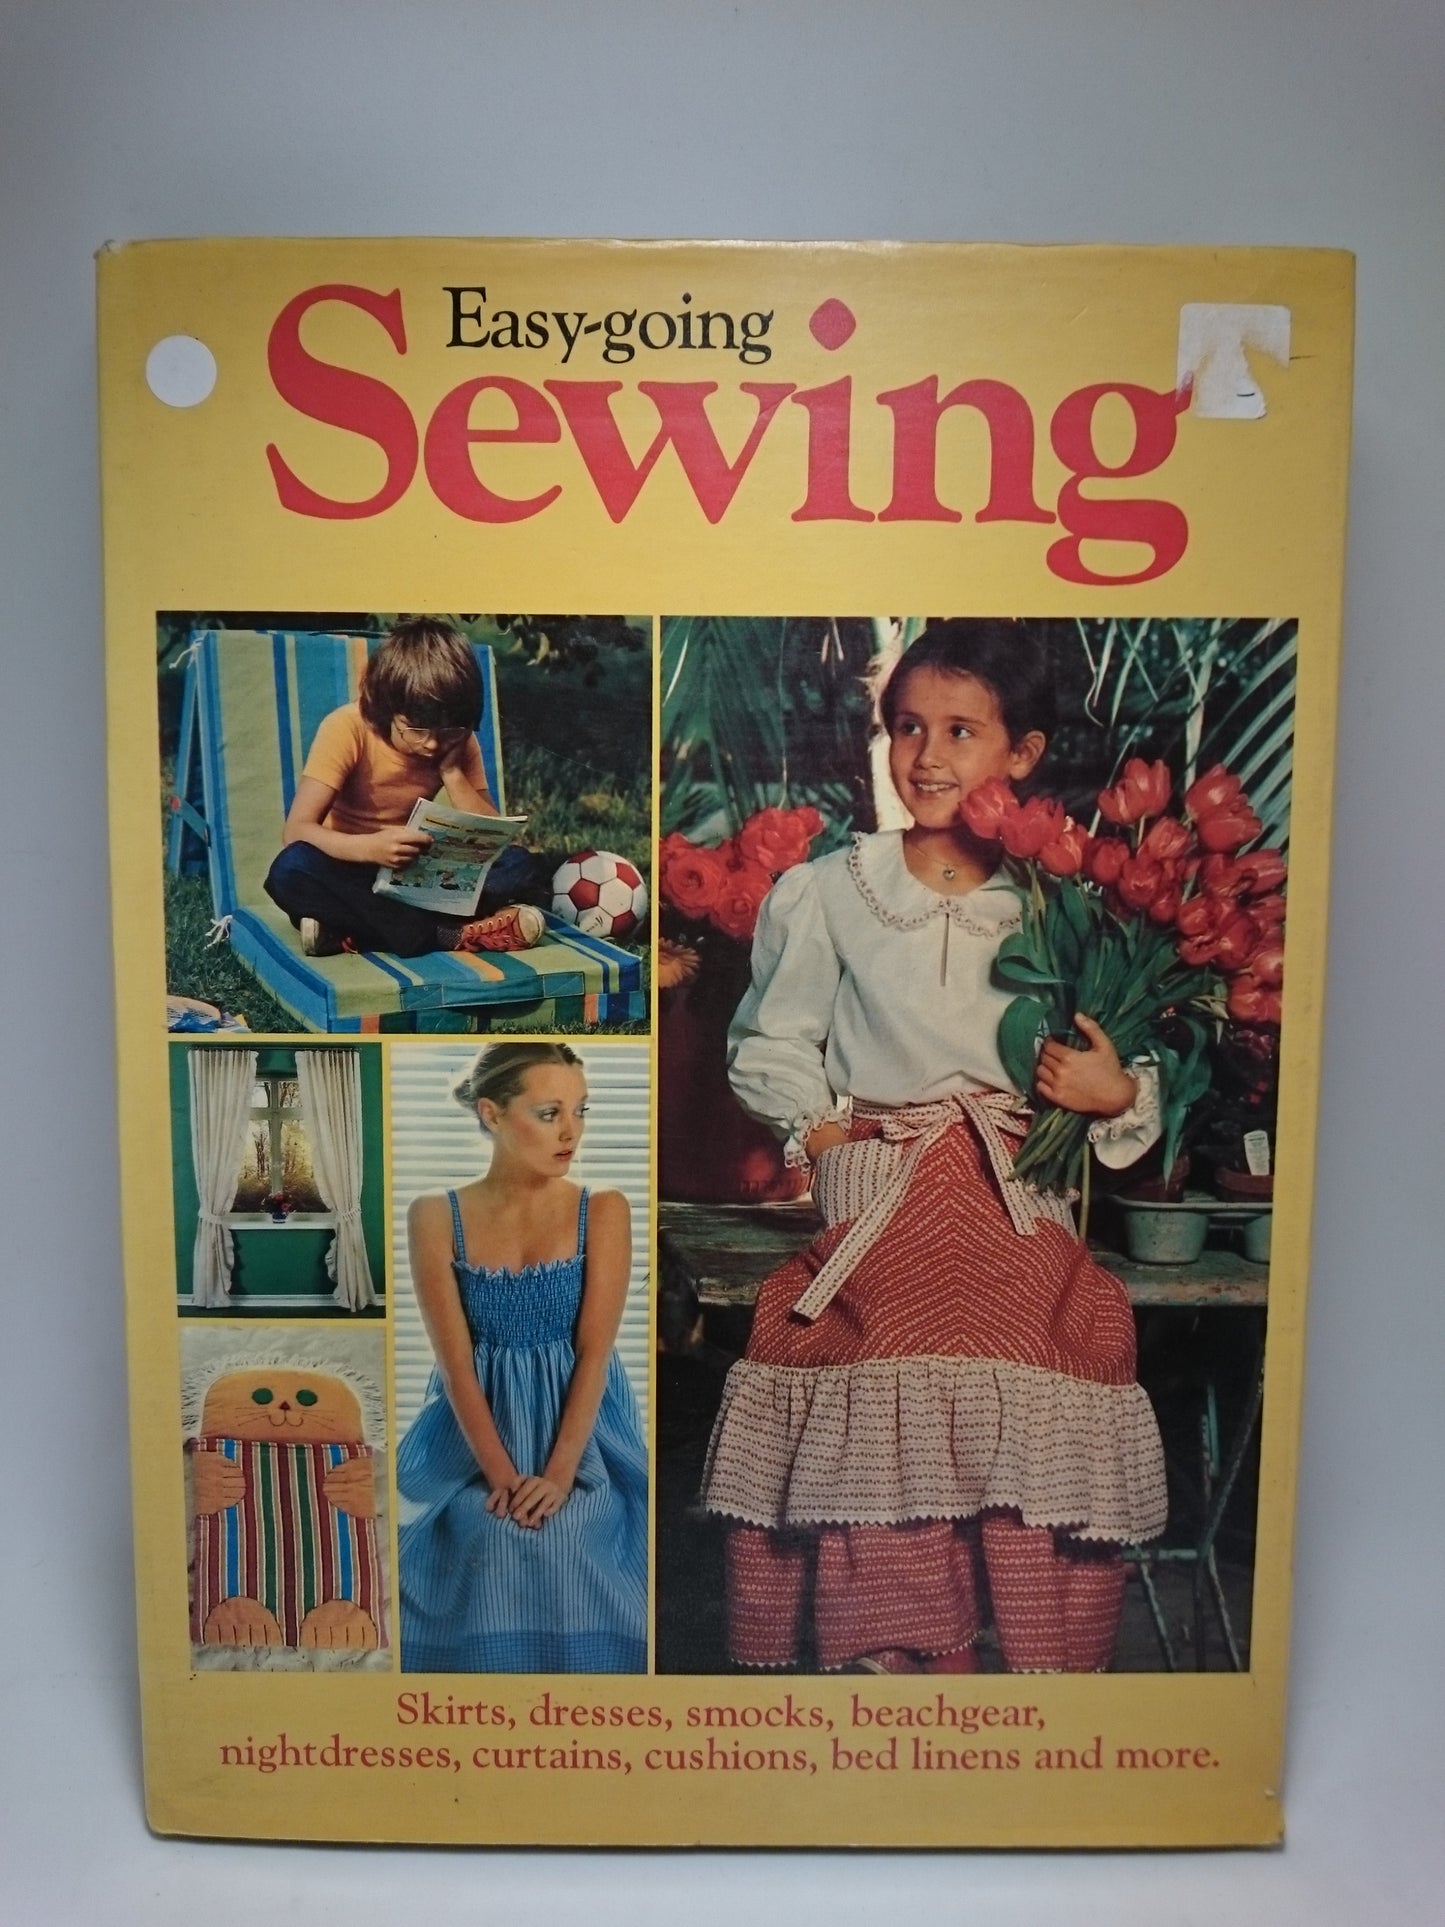 Easy-going Sewing